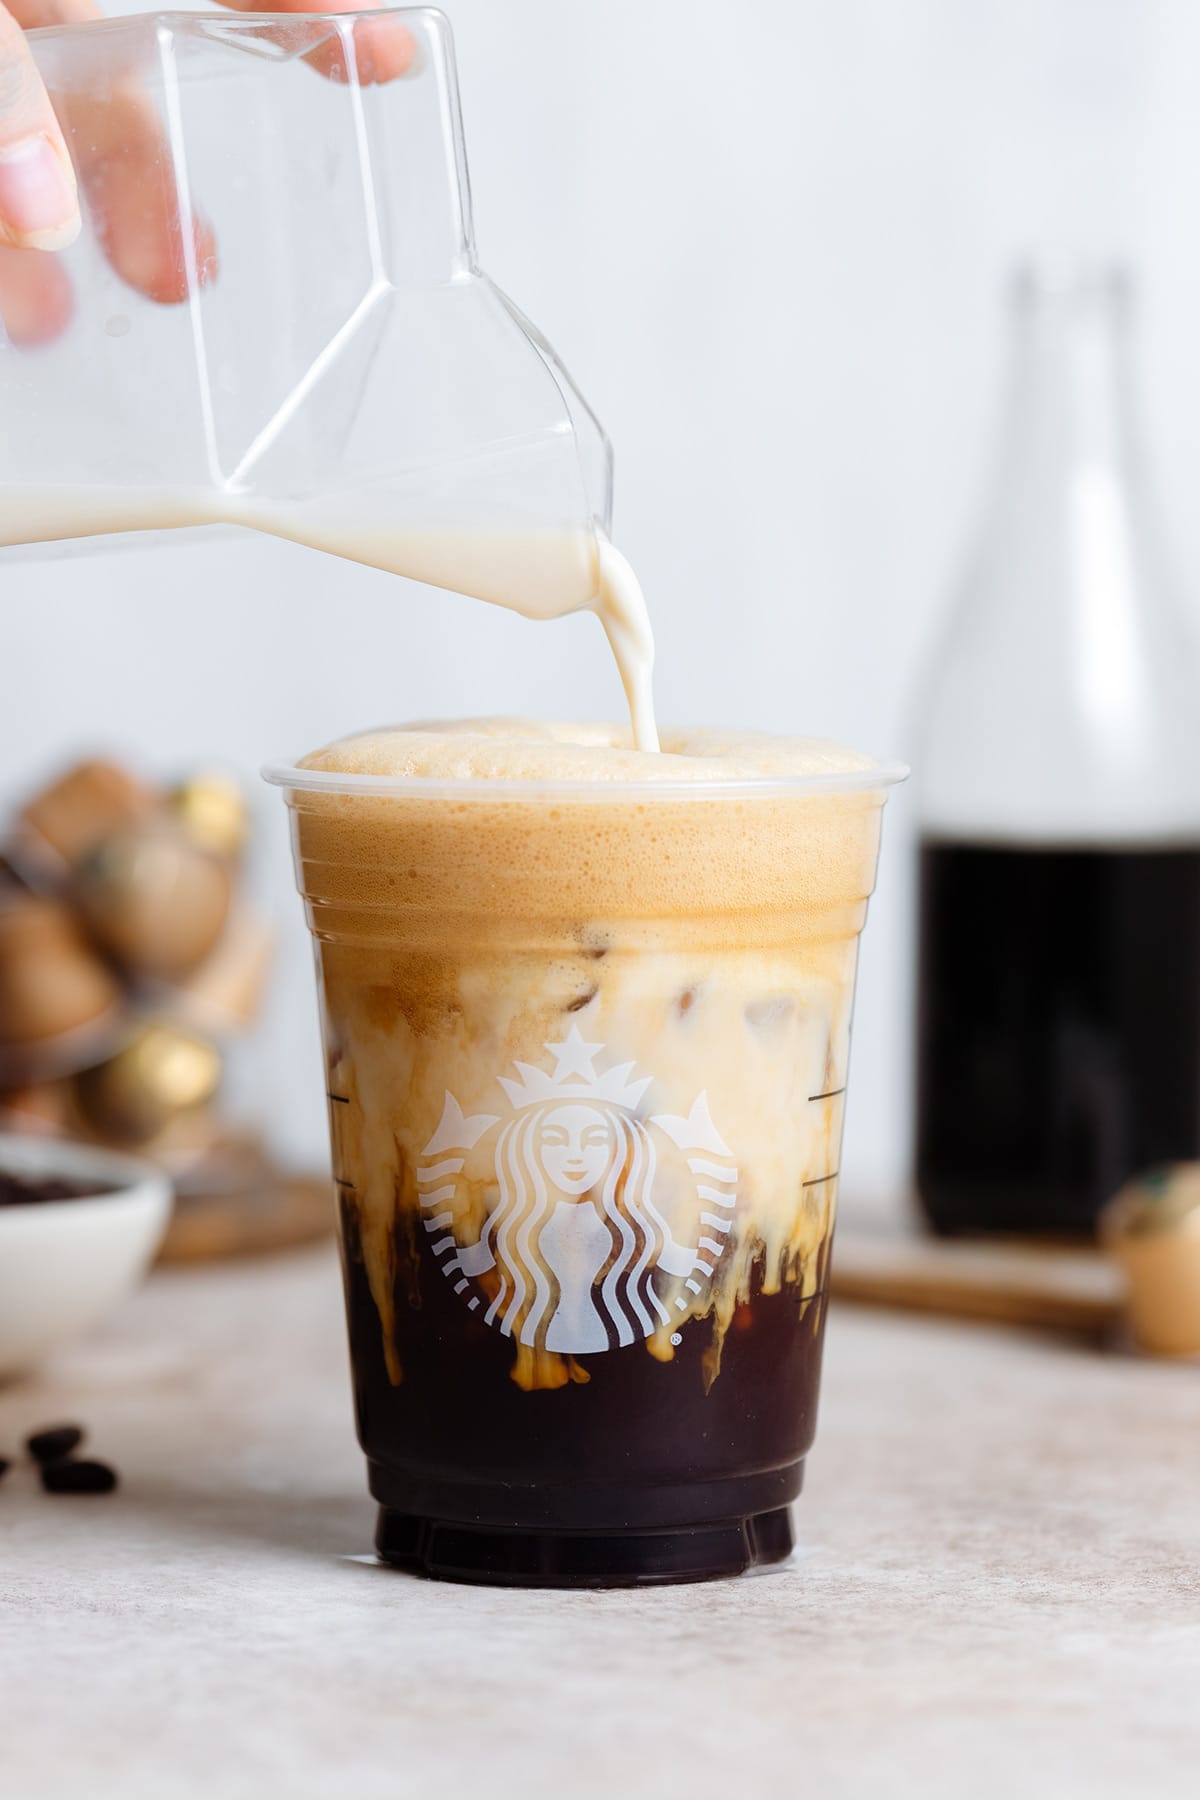 Milk being poured into a Starbucks cup with iced shaken espresso.